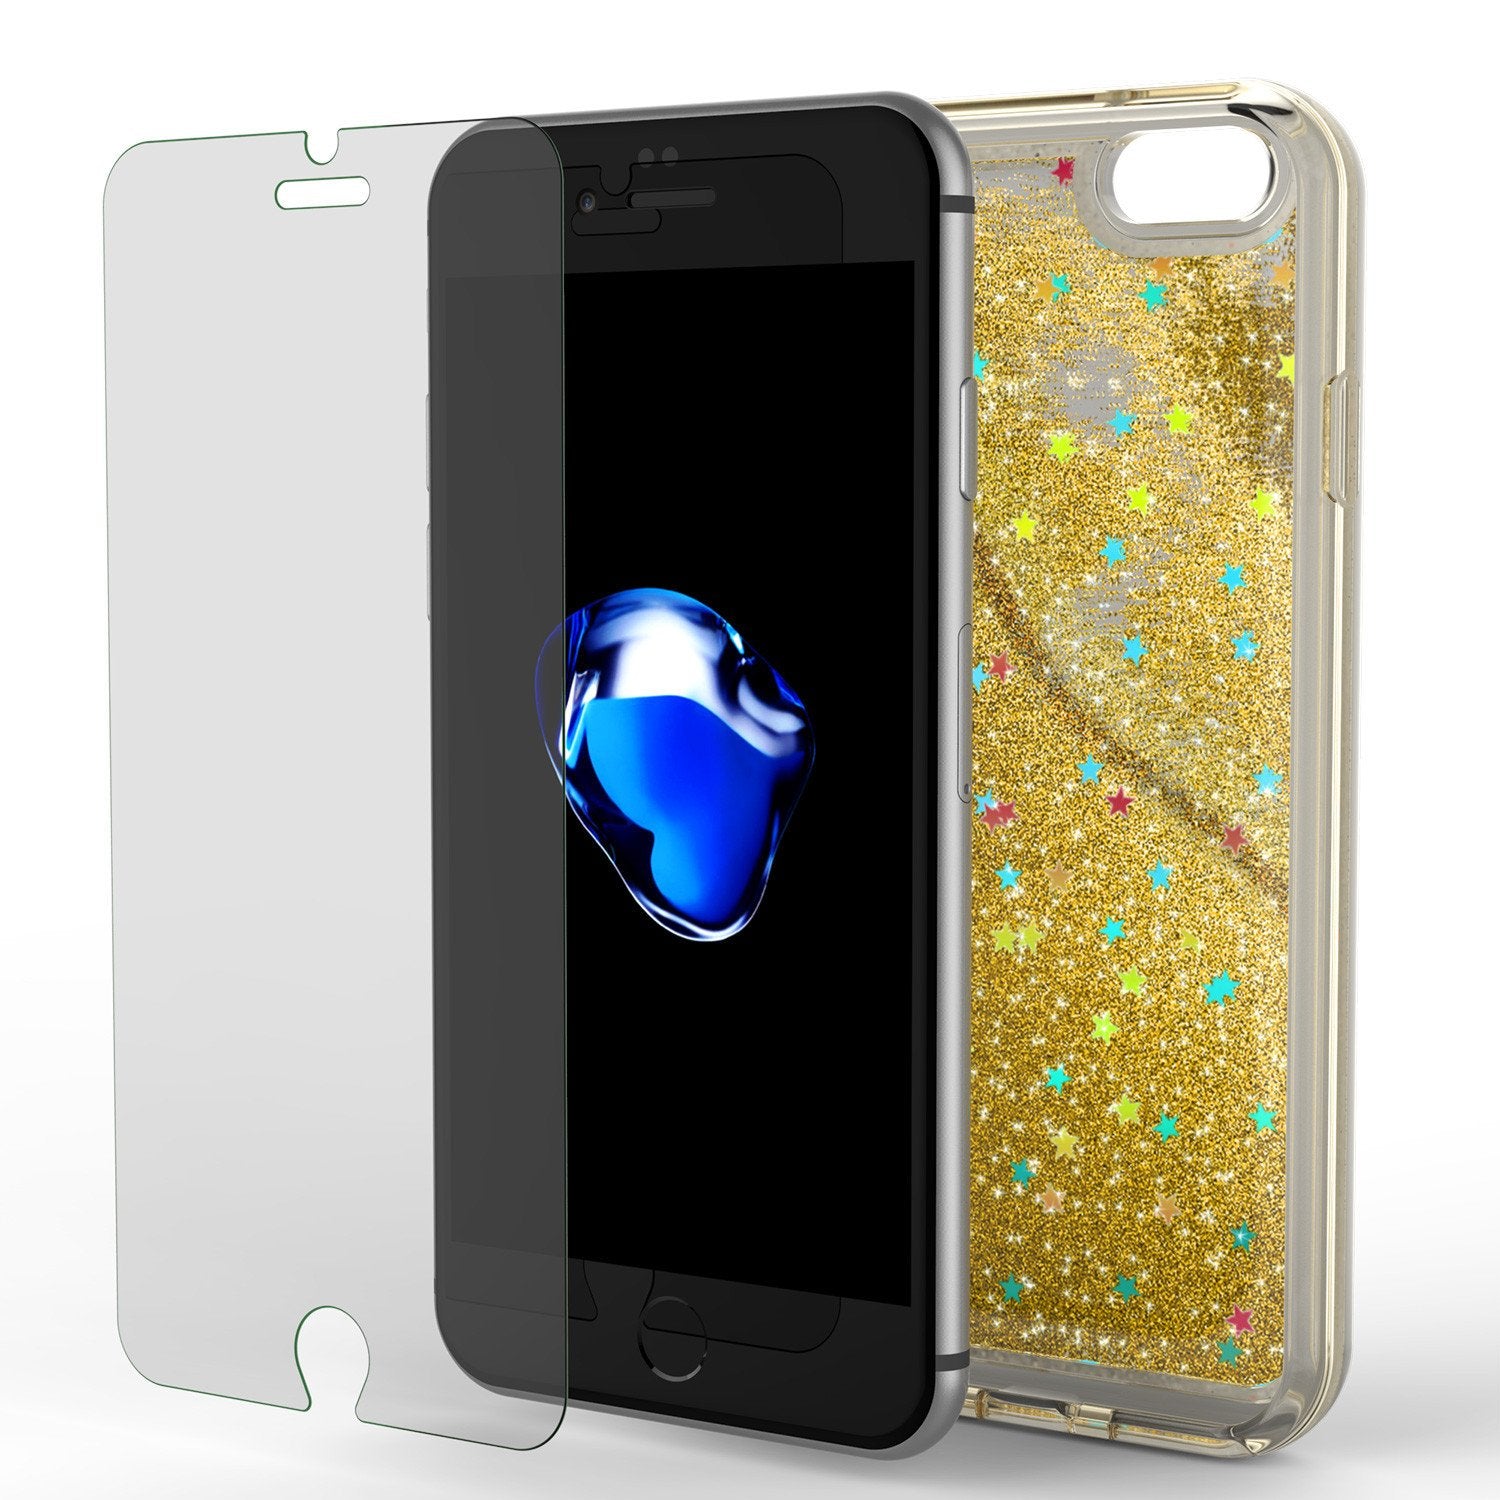 iPhone 7 Case, Punkcase [Liquid Gold Series] Protective Dual Layer Floating Glitter Cover with lots of Bling & Sparkle + 0.3mm Tempered Glass Screen Protector for Apple iPhone 7s